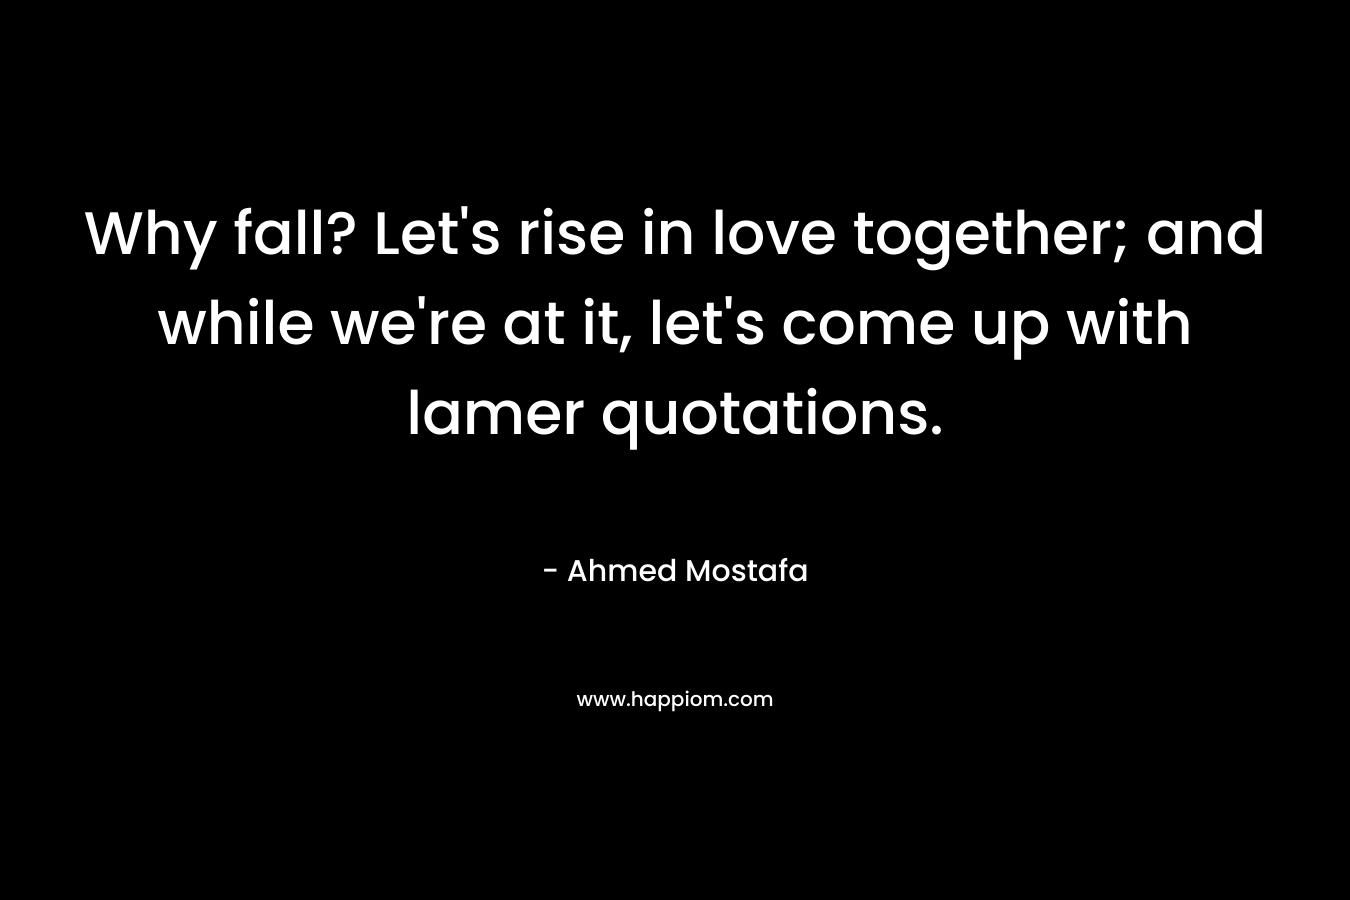 Why fall? Let’s rise in love together; and while we’re at it, let’s come up with lamer quotations. – Ahmed Mostafa